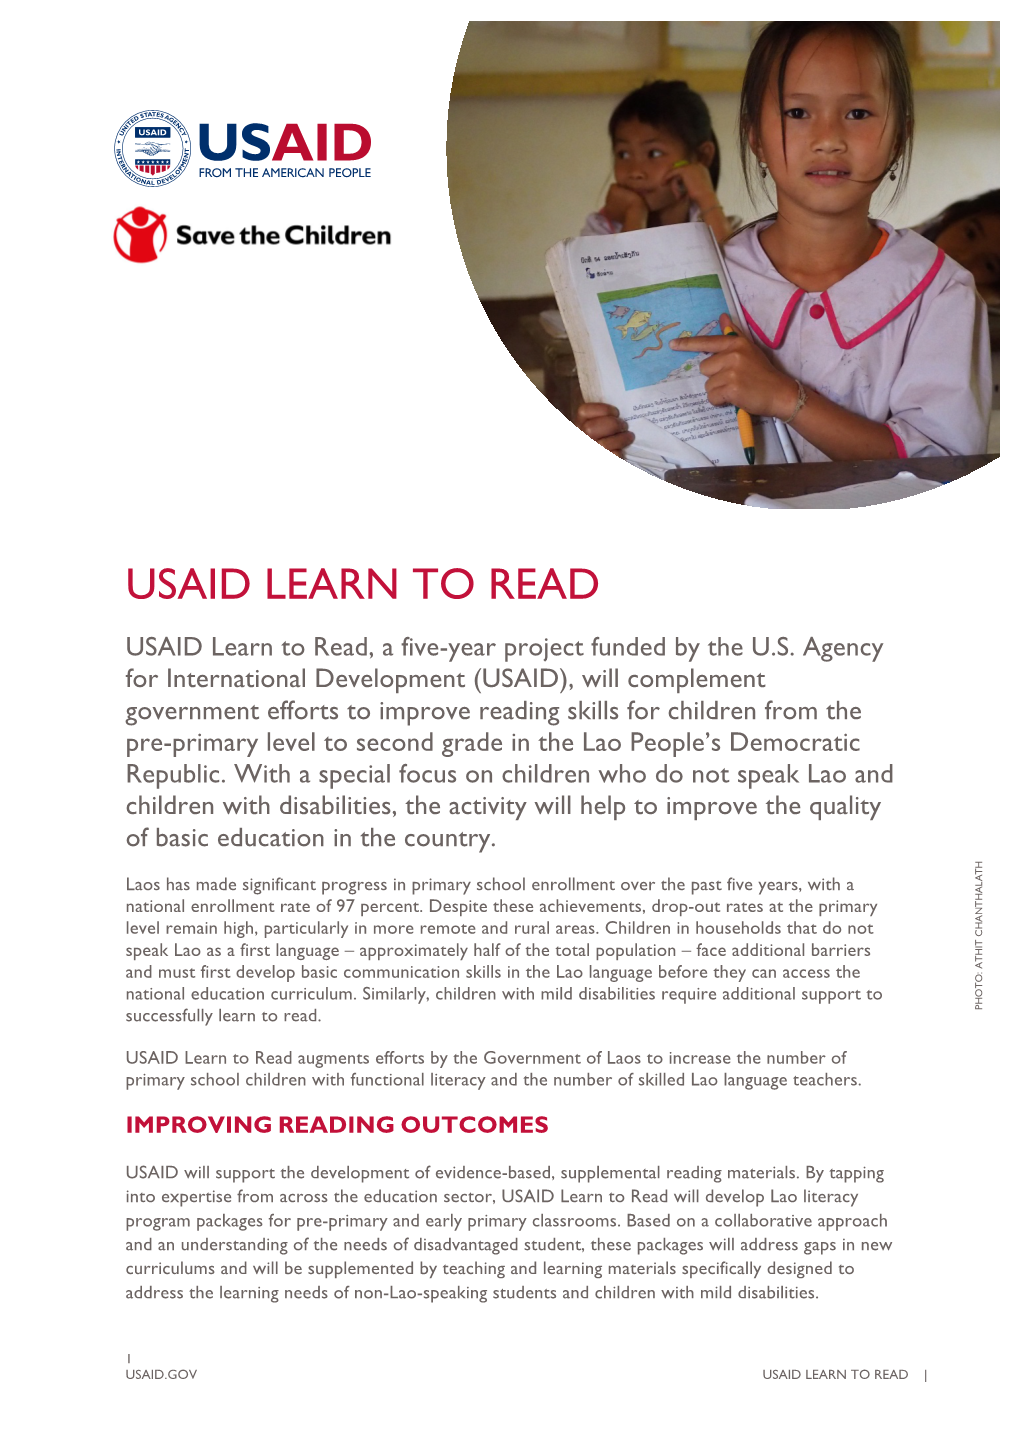 USAID Learn to Read Fact Sheet